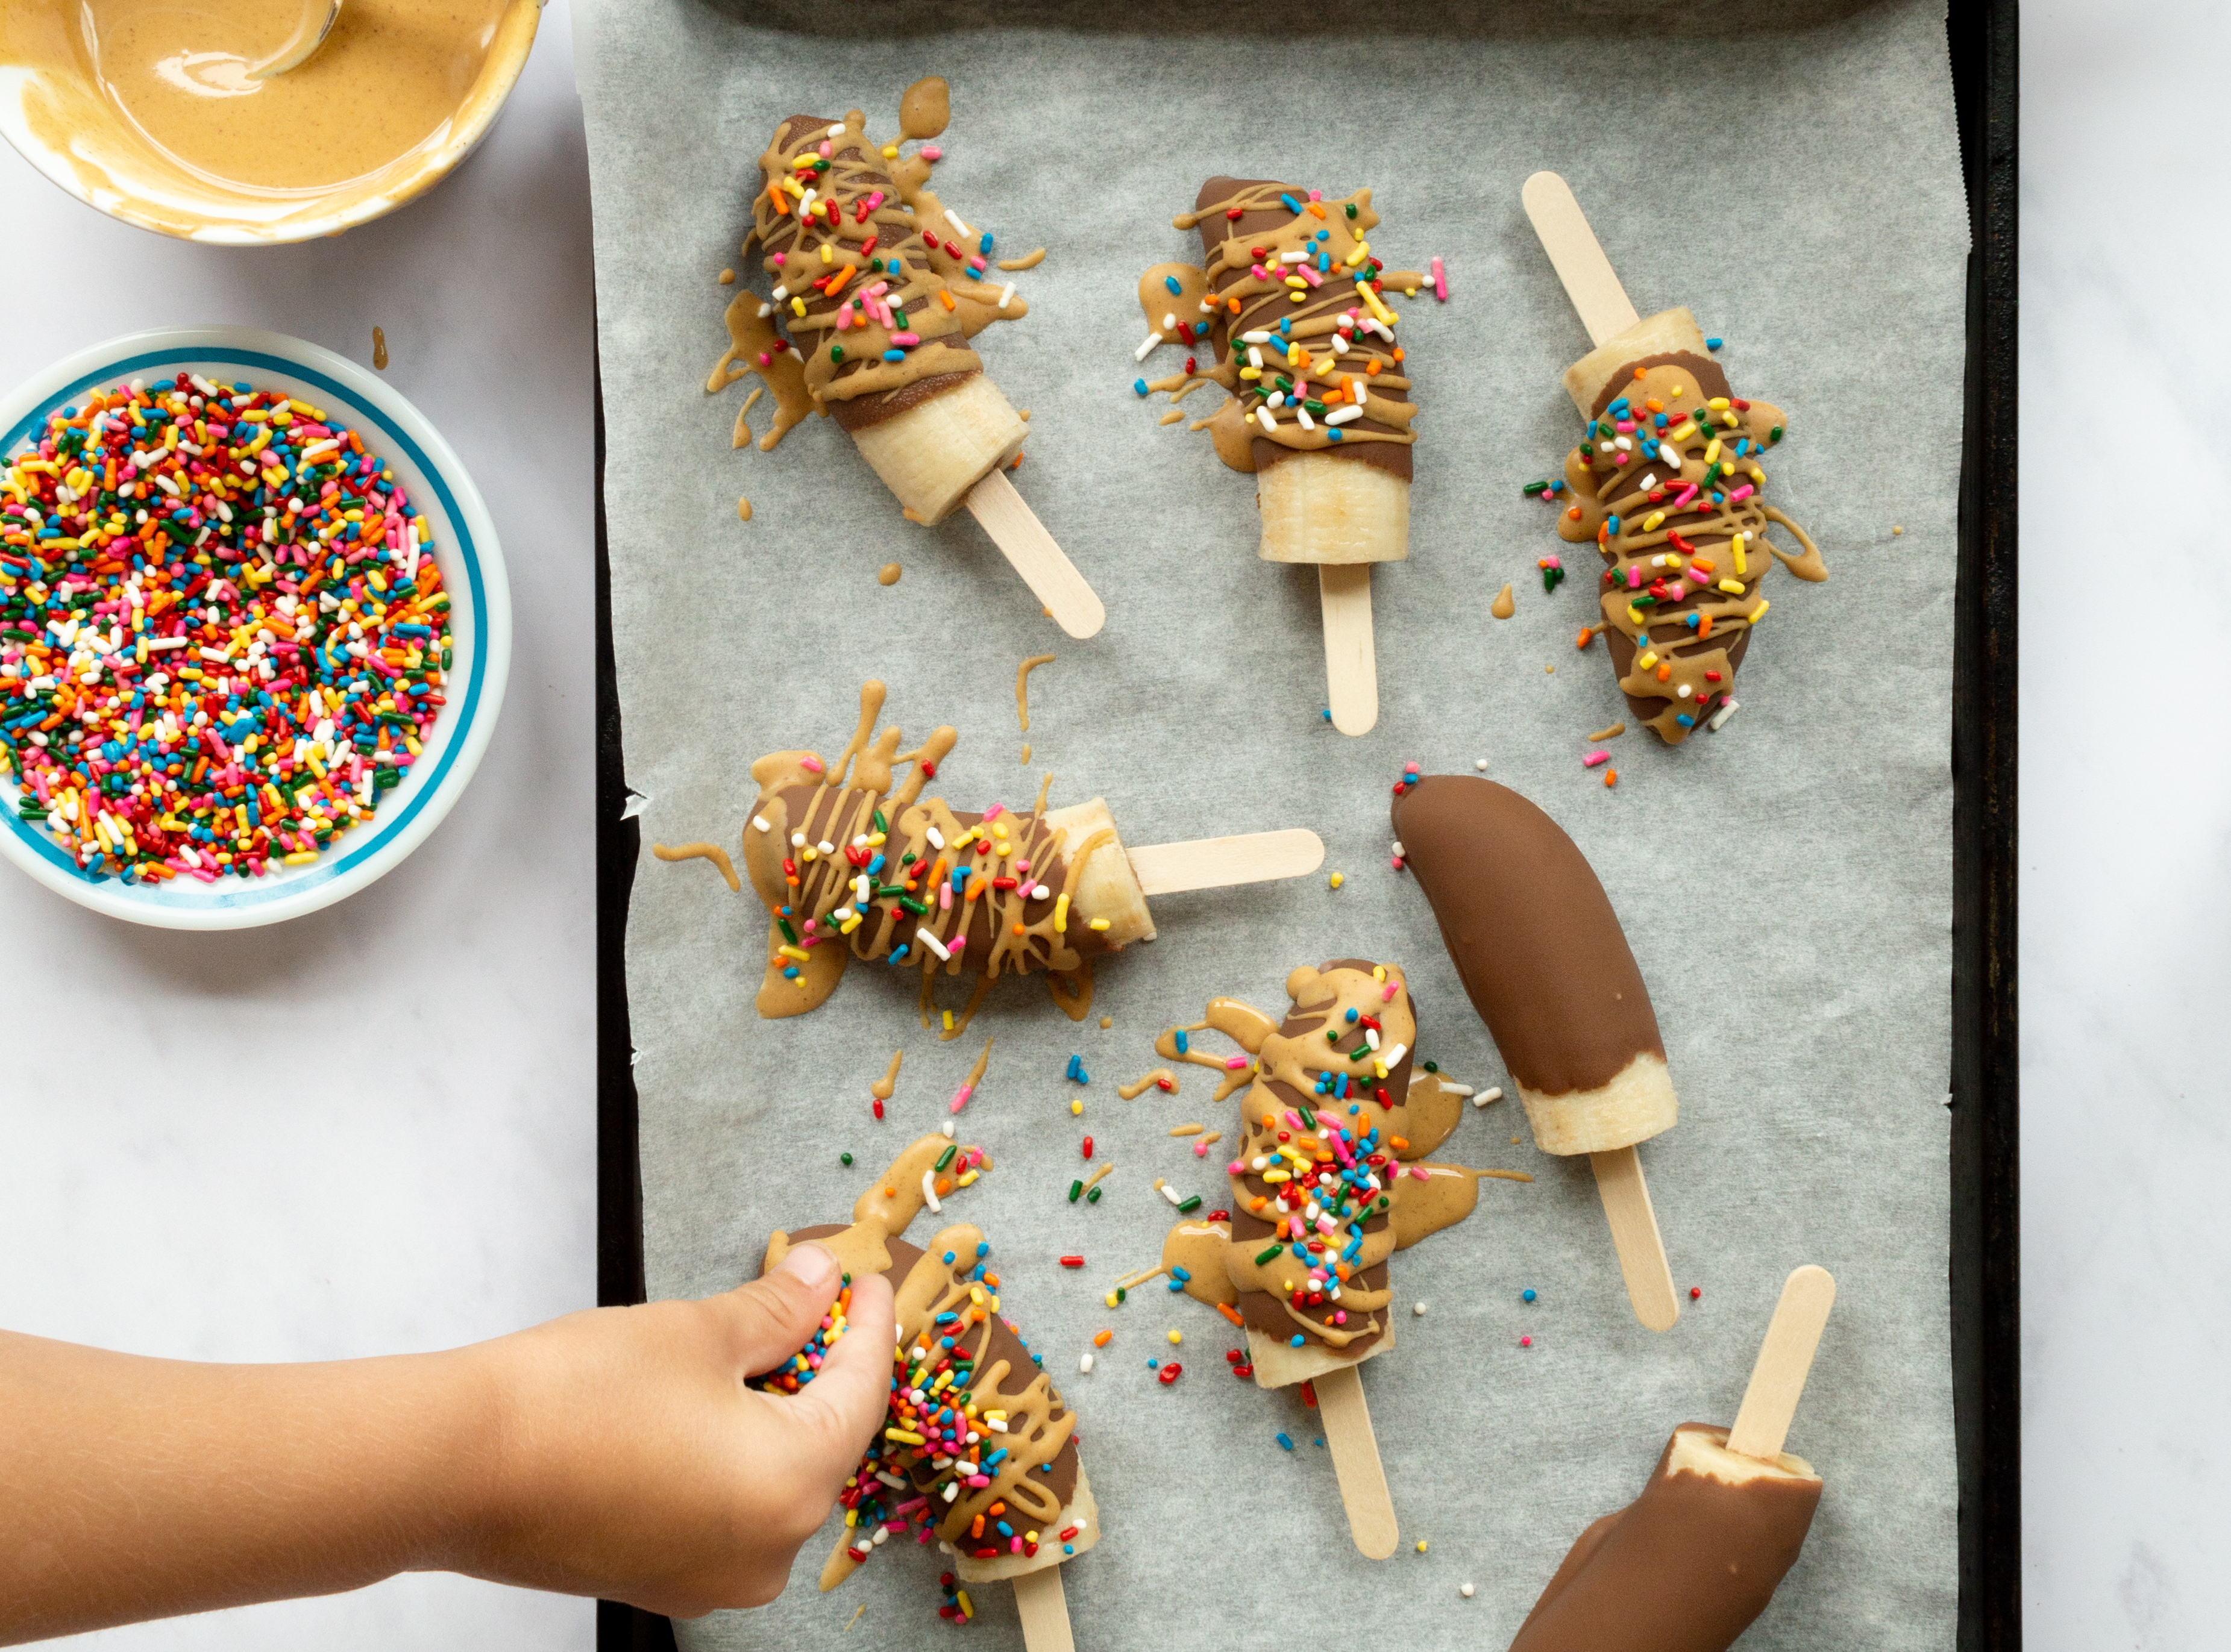 https://images.ctfassets.net/3vz37y2qhojh/3DHgd8dLOHtAegcmBsNI6w/94bc8f7f6870e59cdf7c5b2ba1365a06/Chocolate-Peanut_Butter_Banana_Pops_In_Process_hero.jpg